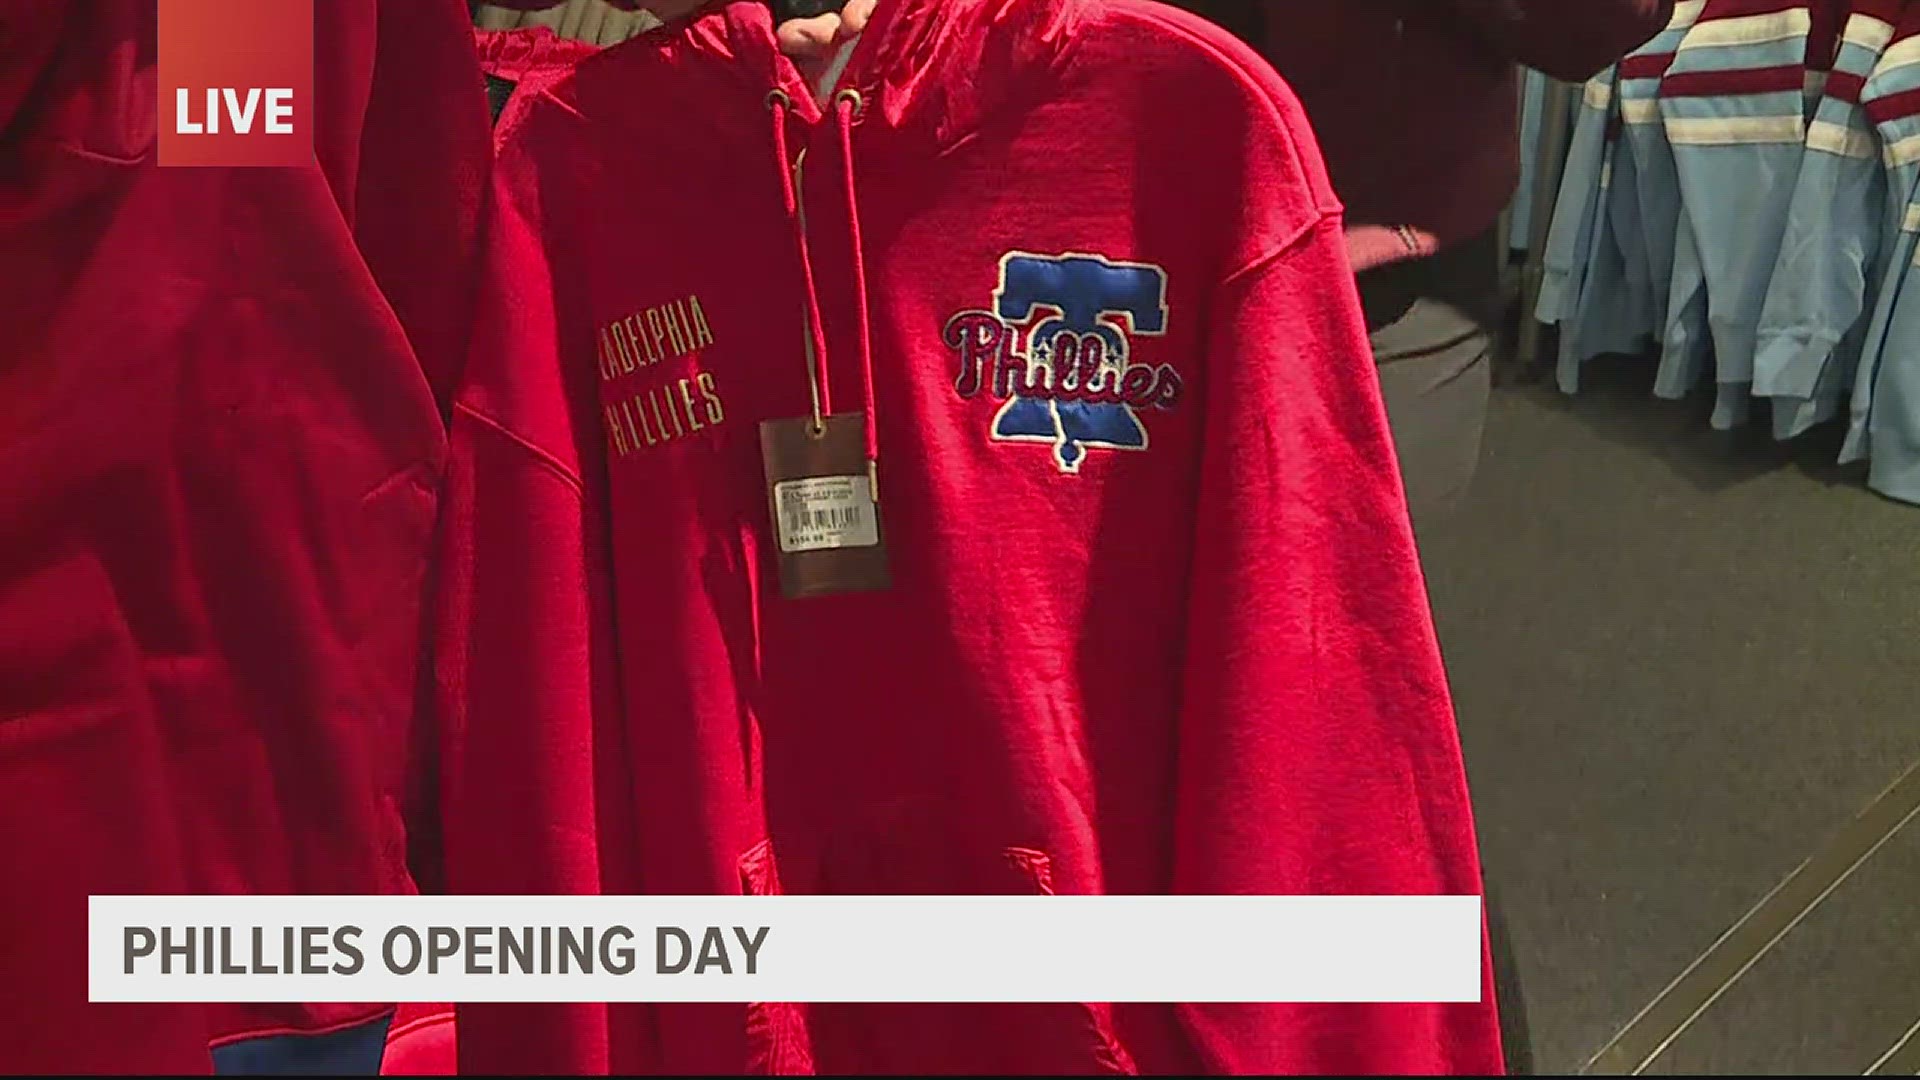 Philadelphia Phillies merchandise is stocked at the team store ahead of Opening Day.